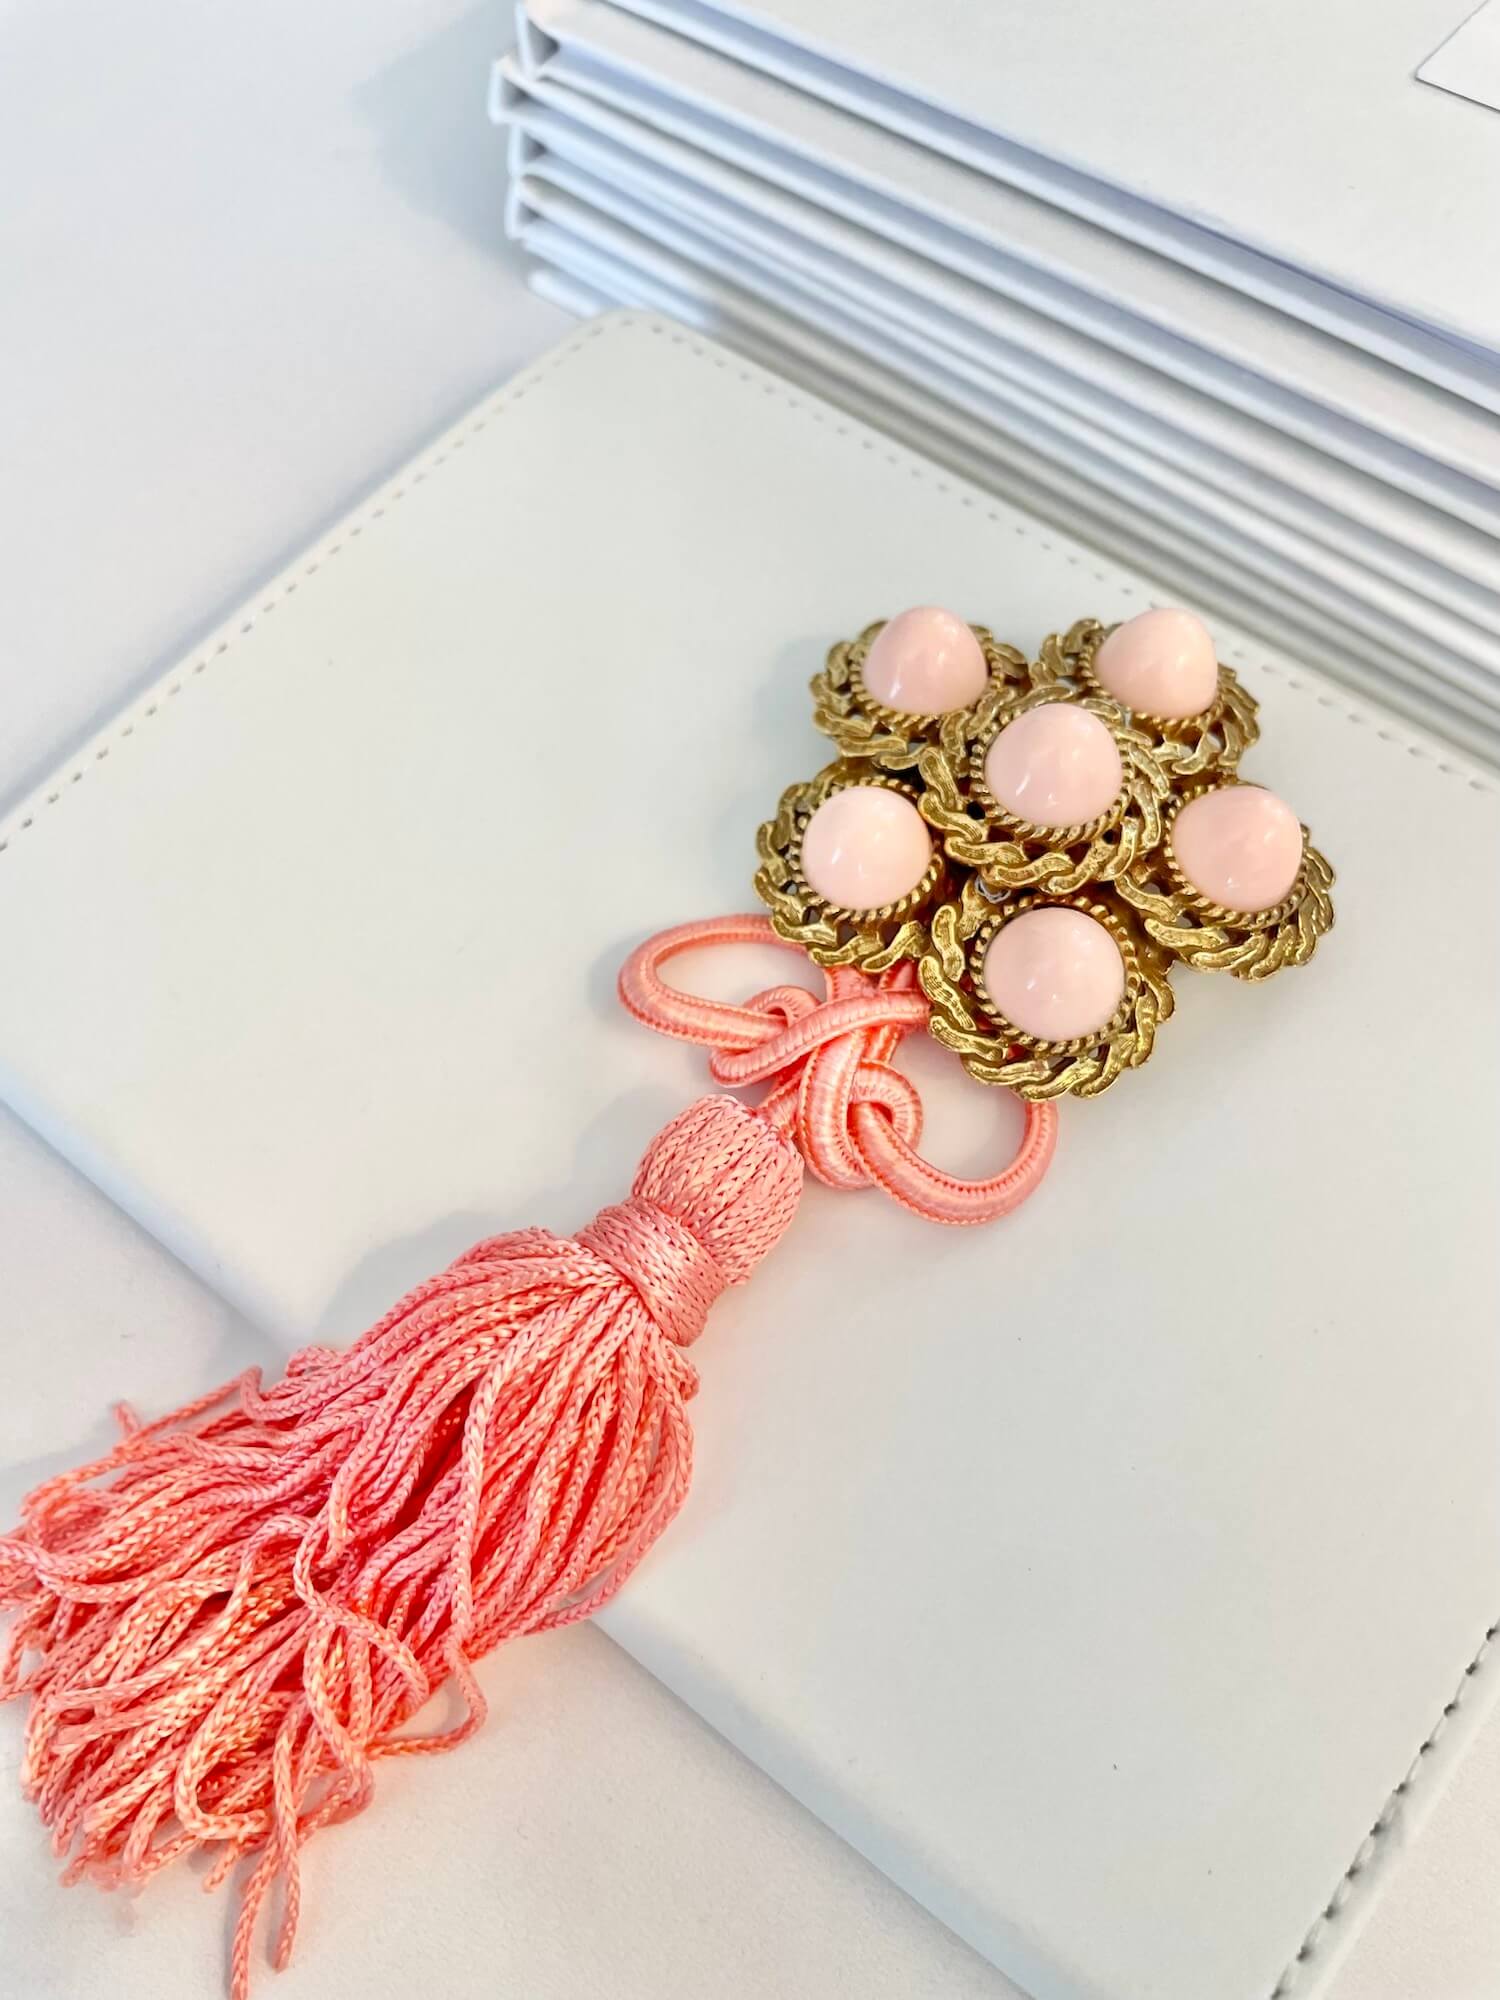 Vintage 1960’s faux angel skin coral brooch, with added tassel for a bit of fun flair!